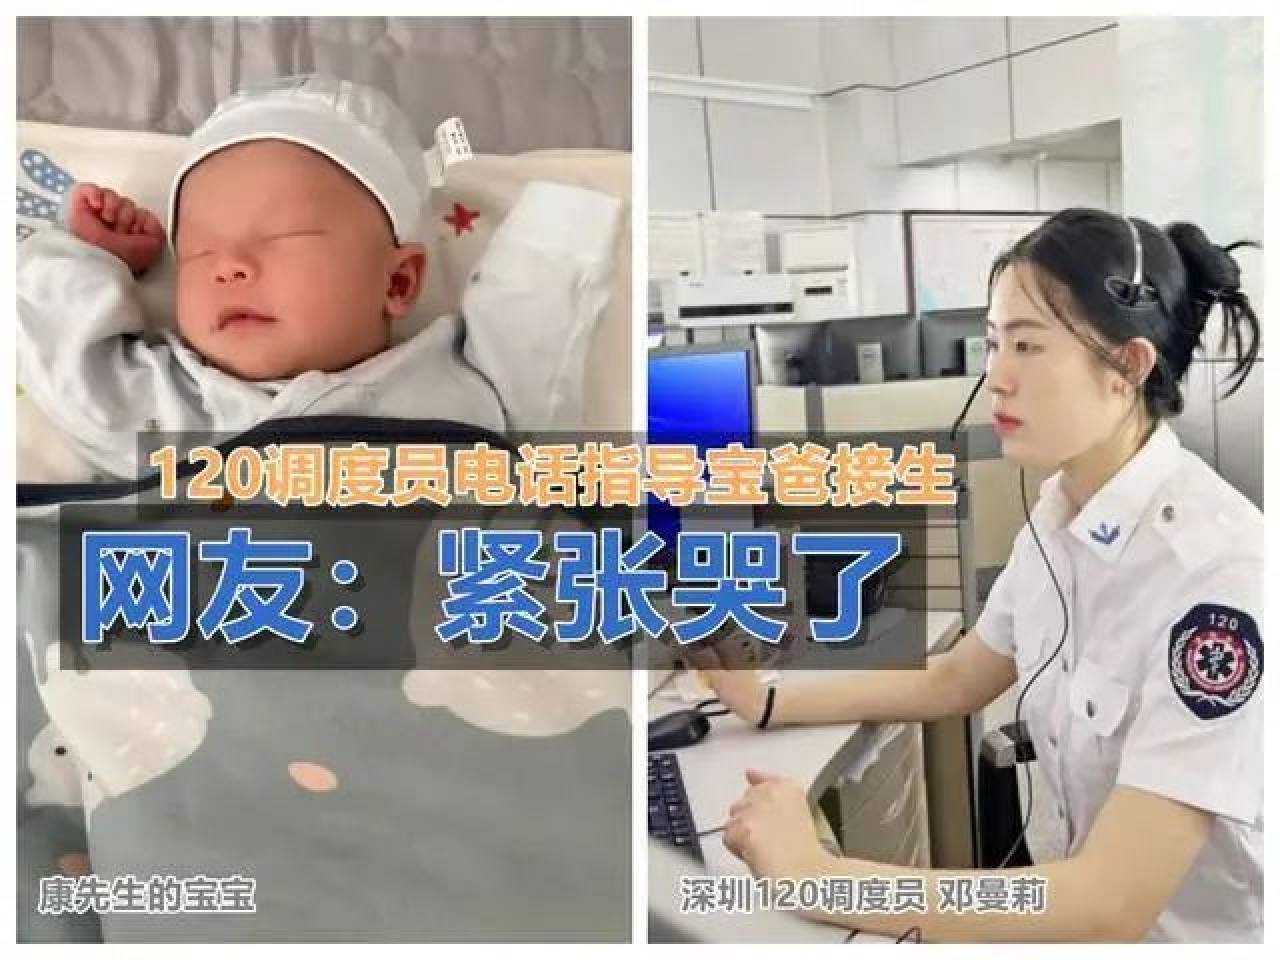 The father was given detailed instructions by an emergency hotline nurse over the phone during the birth. Photo: Weixin